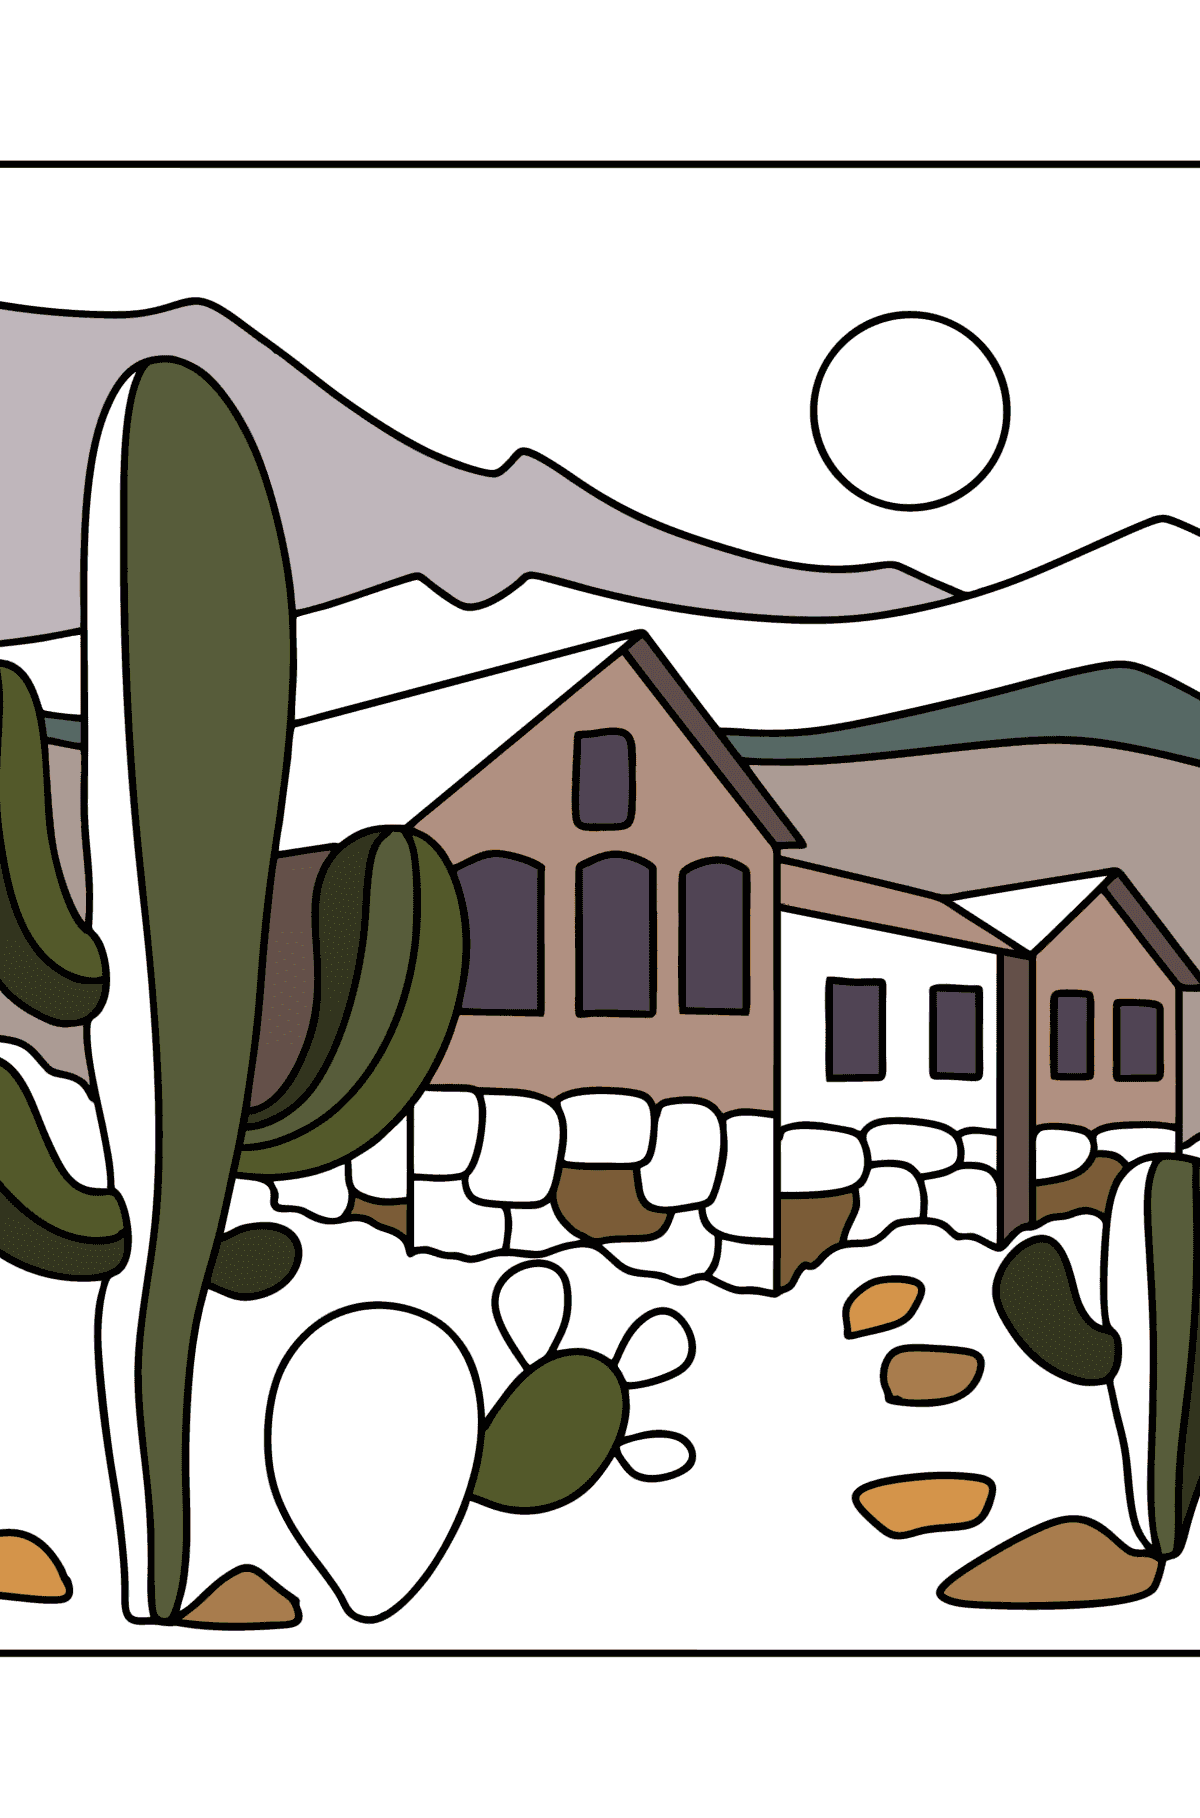 Cottage in the desert coloring page - Coloring Pages for Kids